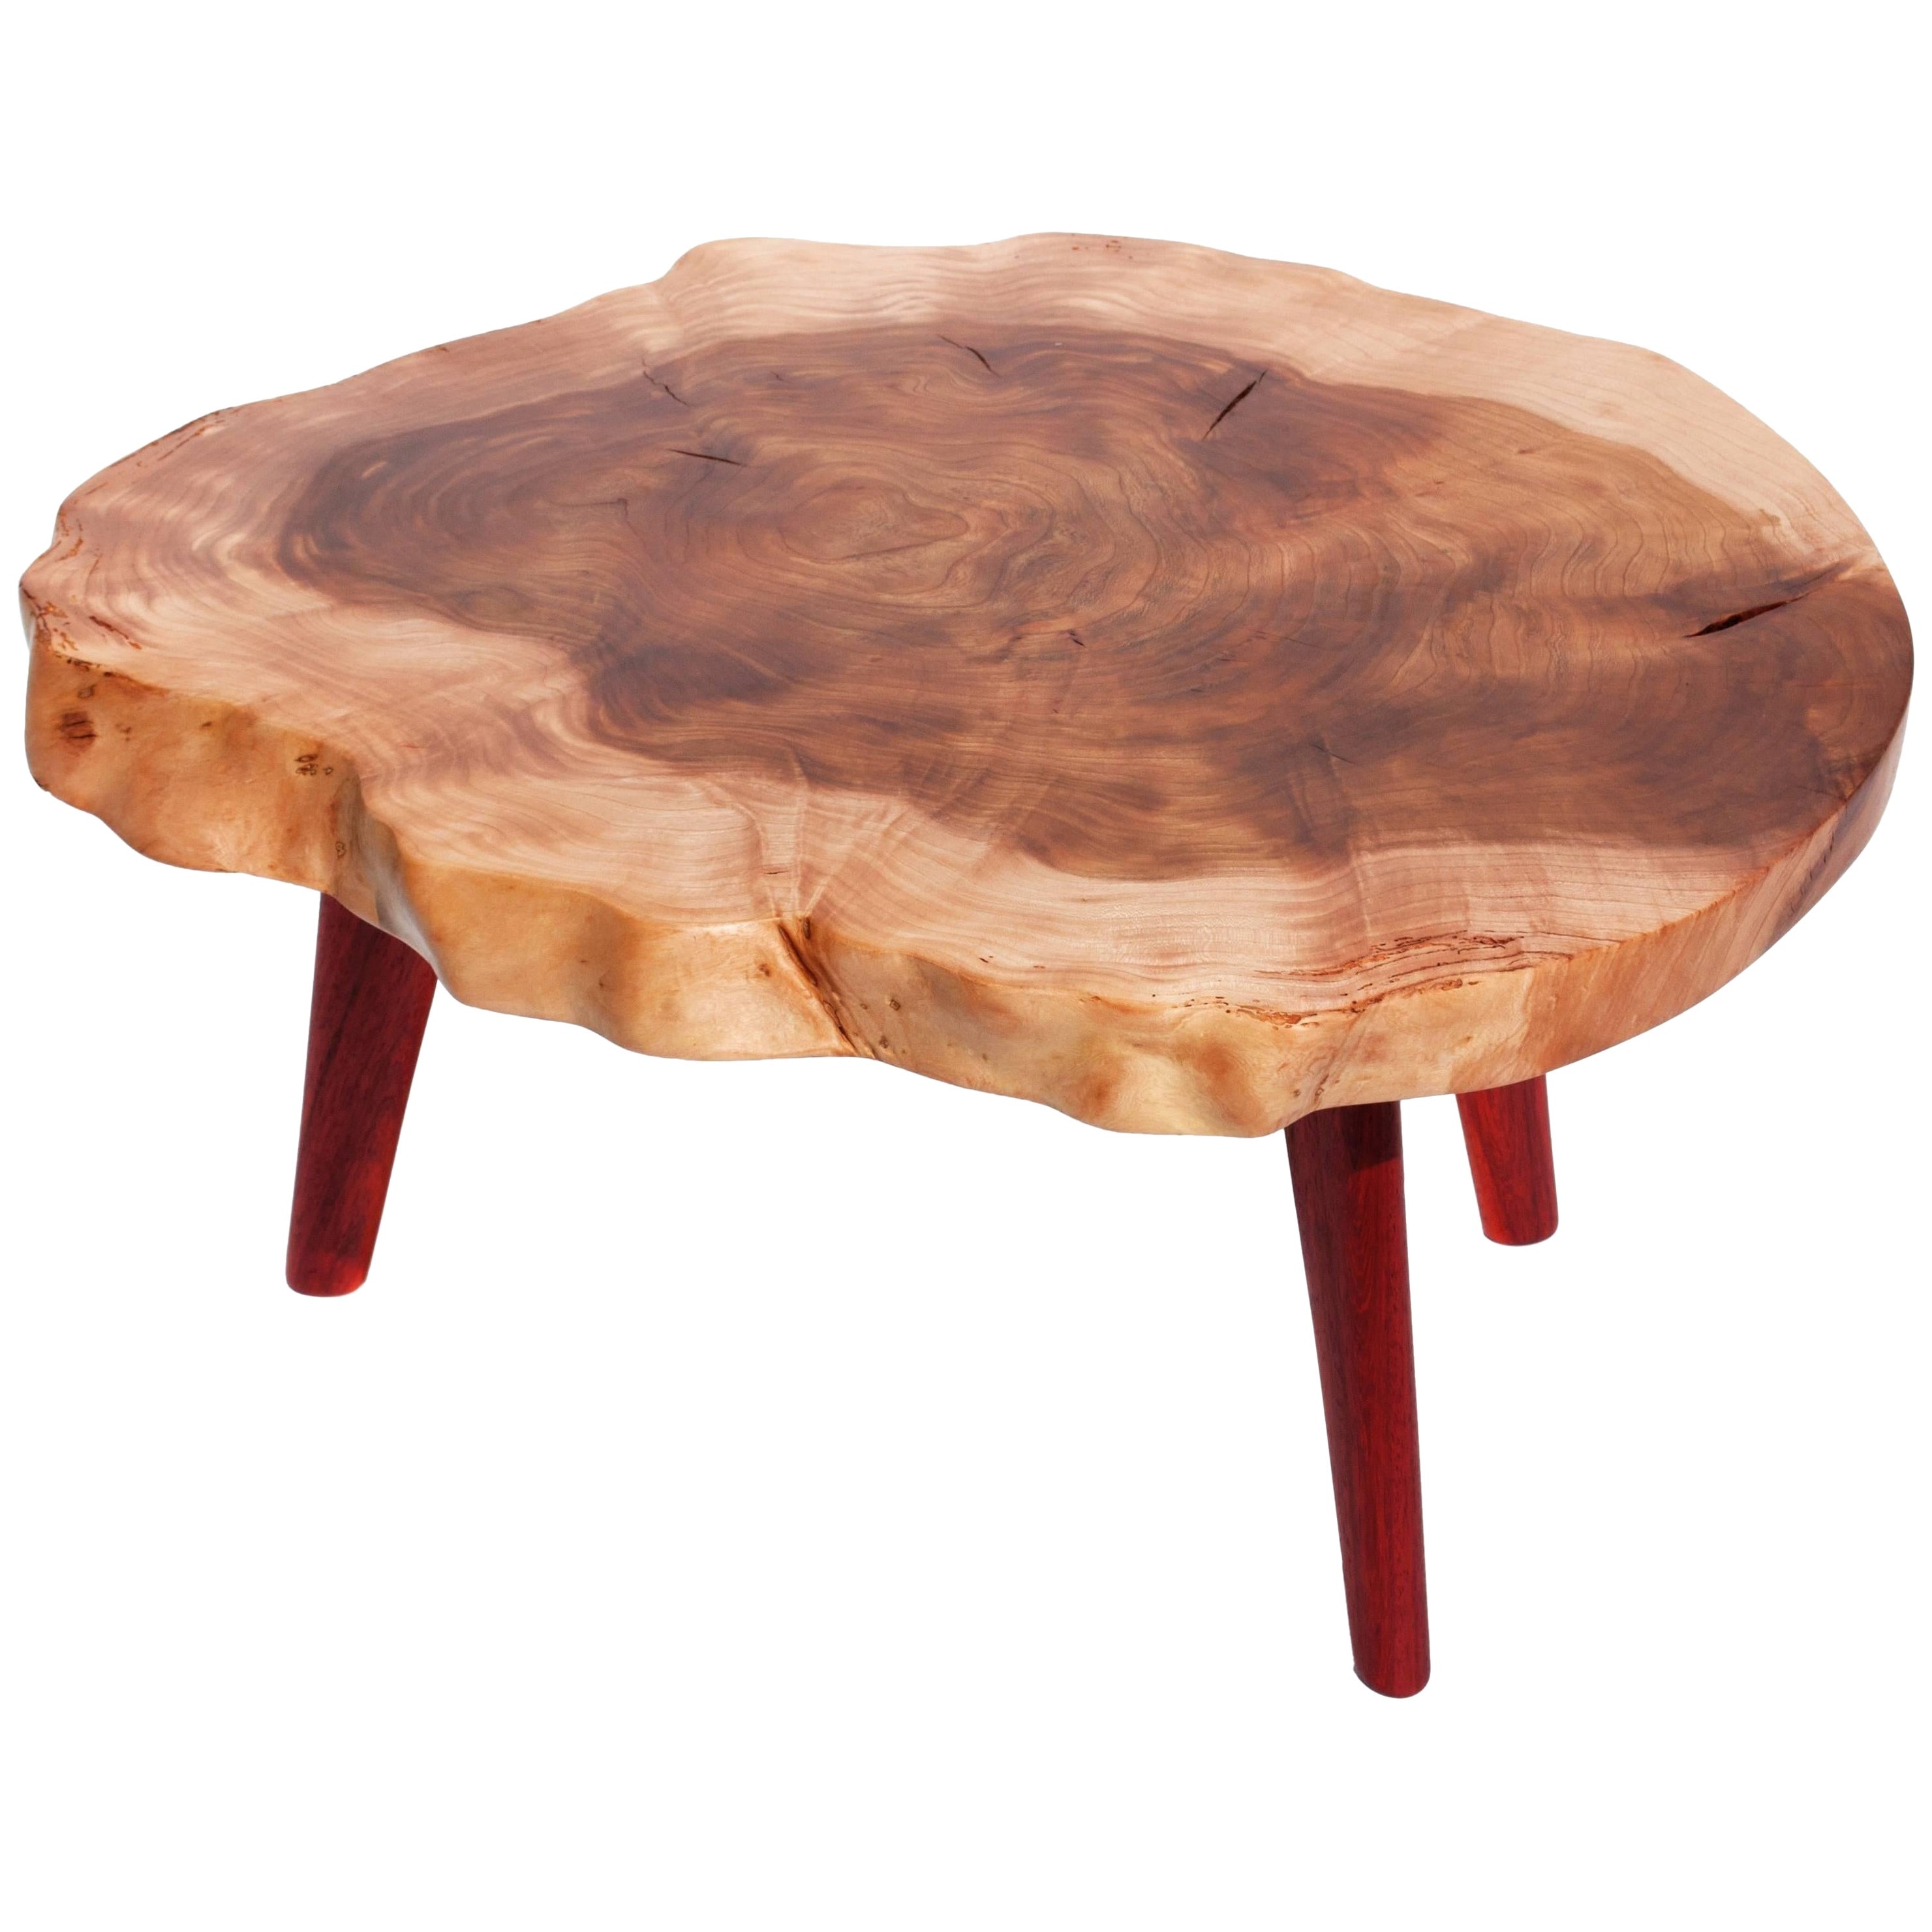 Unique Padouk and Thuja Table by Jörg Pietschmann For Sale at 1stDibs